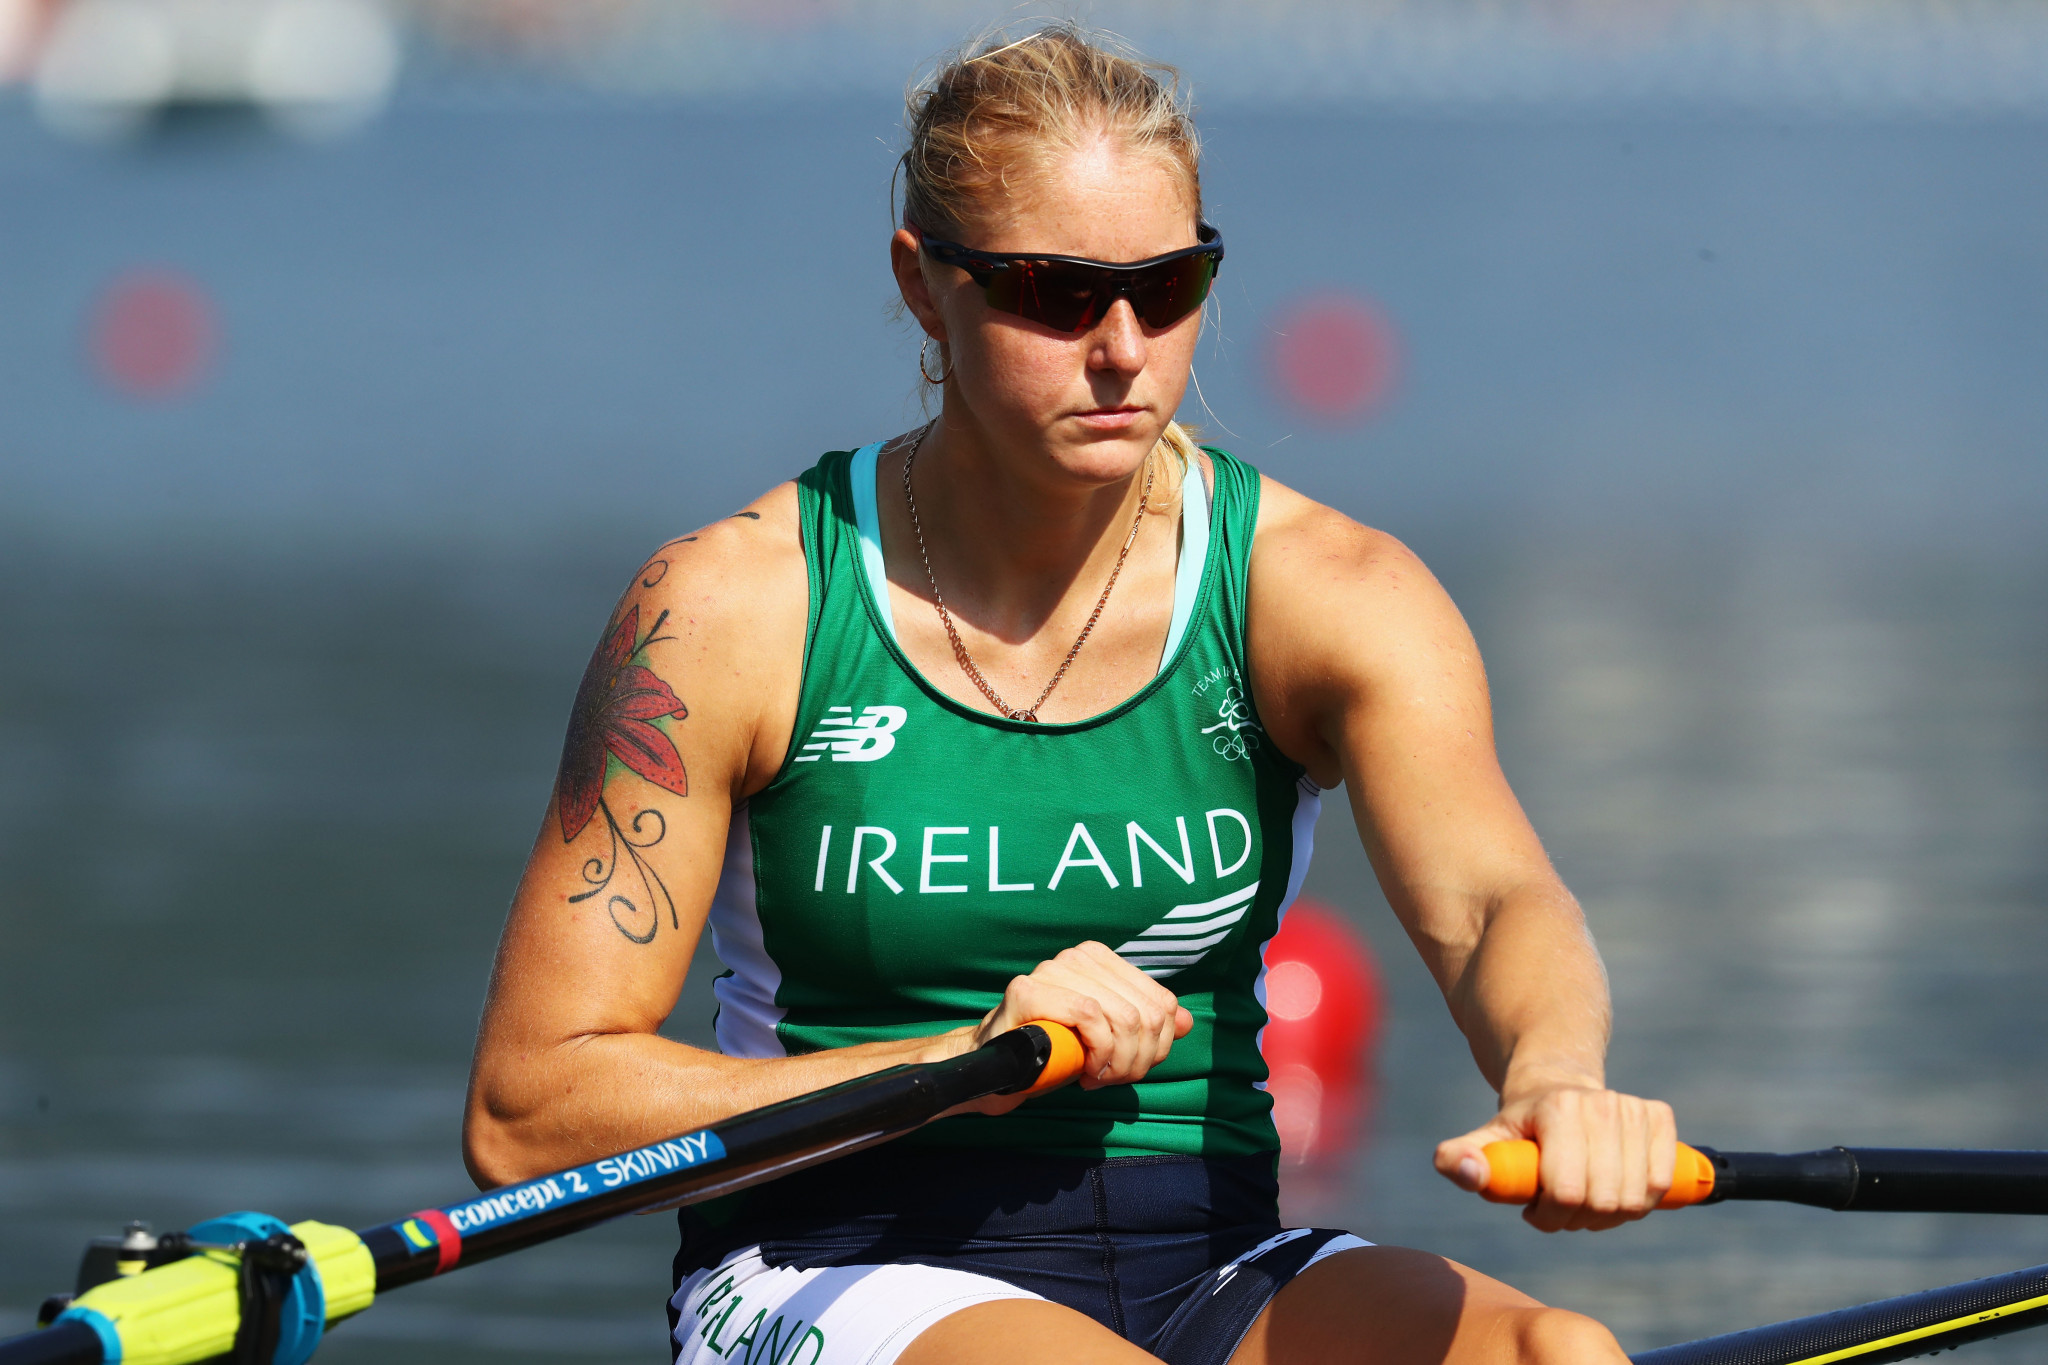 Ireland's Sanita Puspure beat home rower Jeannine Gmelin to the European single sculls title in Lucerne today ©Getty Images